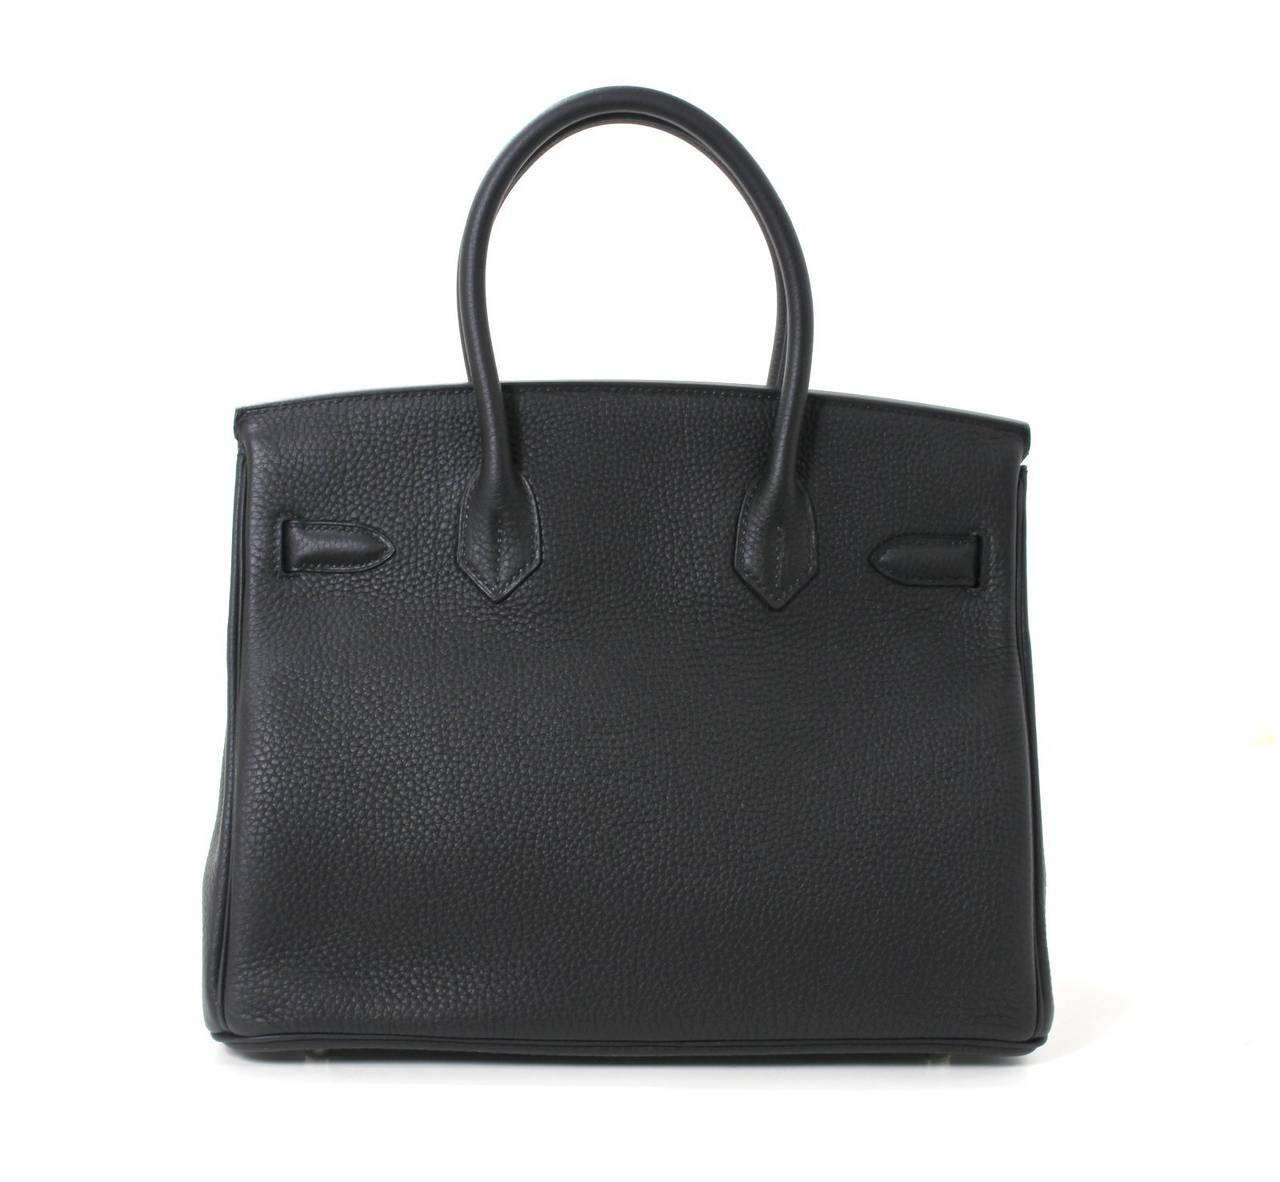 Pristine, store fresh condition (plastic on hardware) Hermès Birkin Bag in BLACK Togo Leather with Palladium hardware, 30 cm size.   
Crafted by hand and considered by many as the epitome of luxury items, Birkins are in extremely high demand but